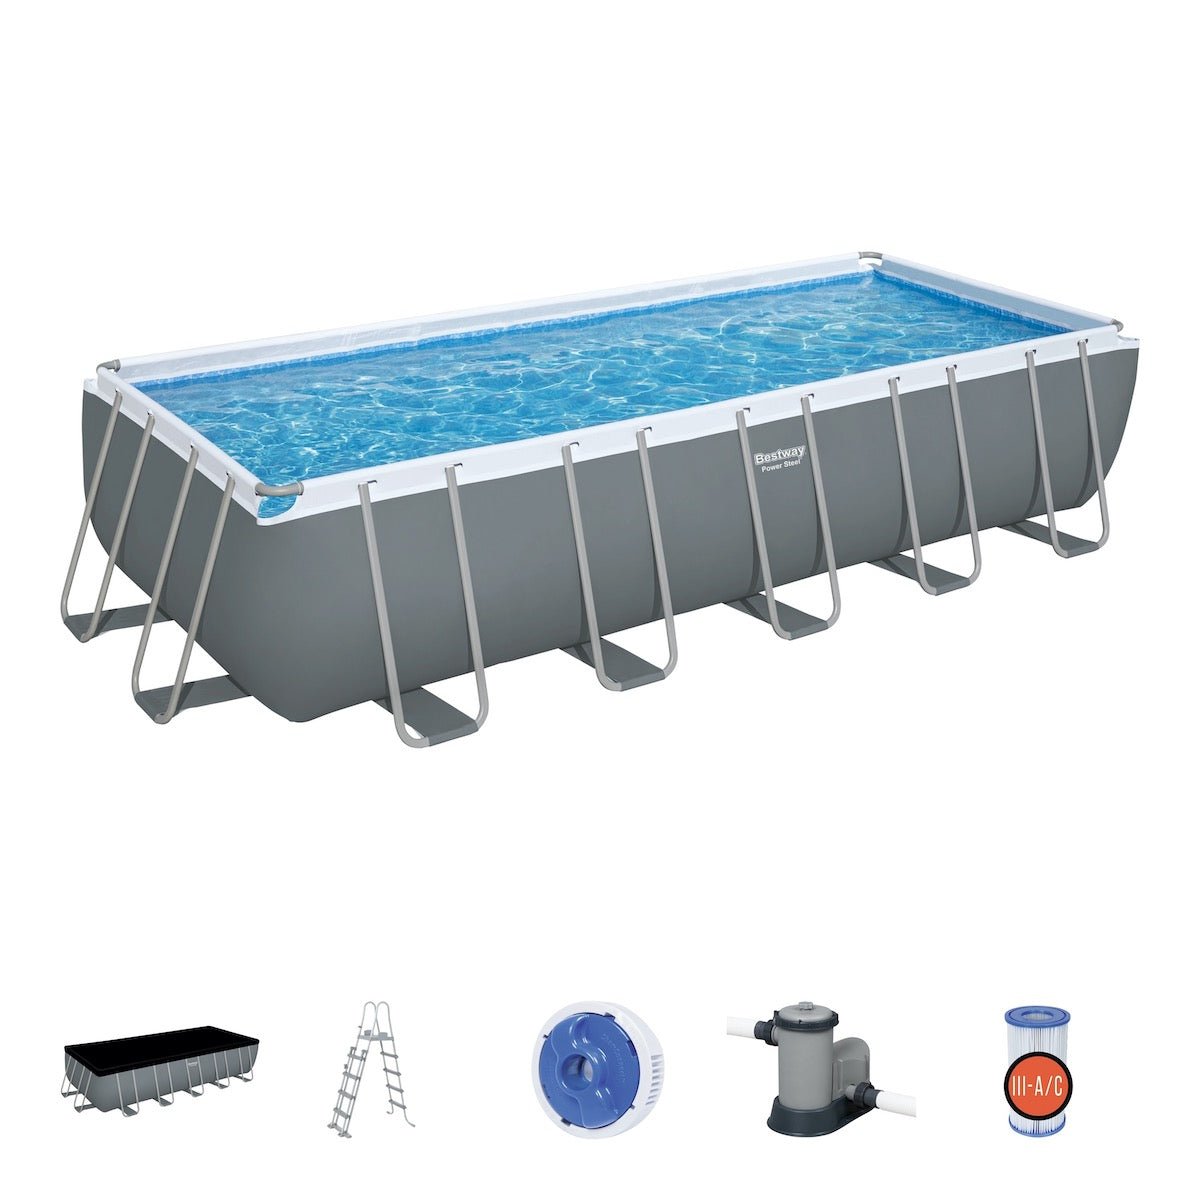 Bestway Power Steel 21ft x 9'ft x 52in Rectangular Pool Set Above Ground Swimming Pool – BW5611Z